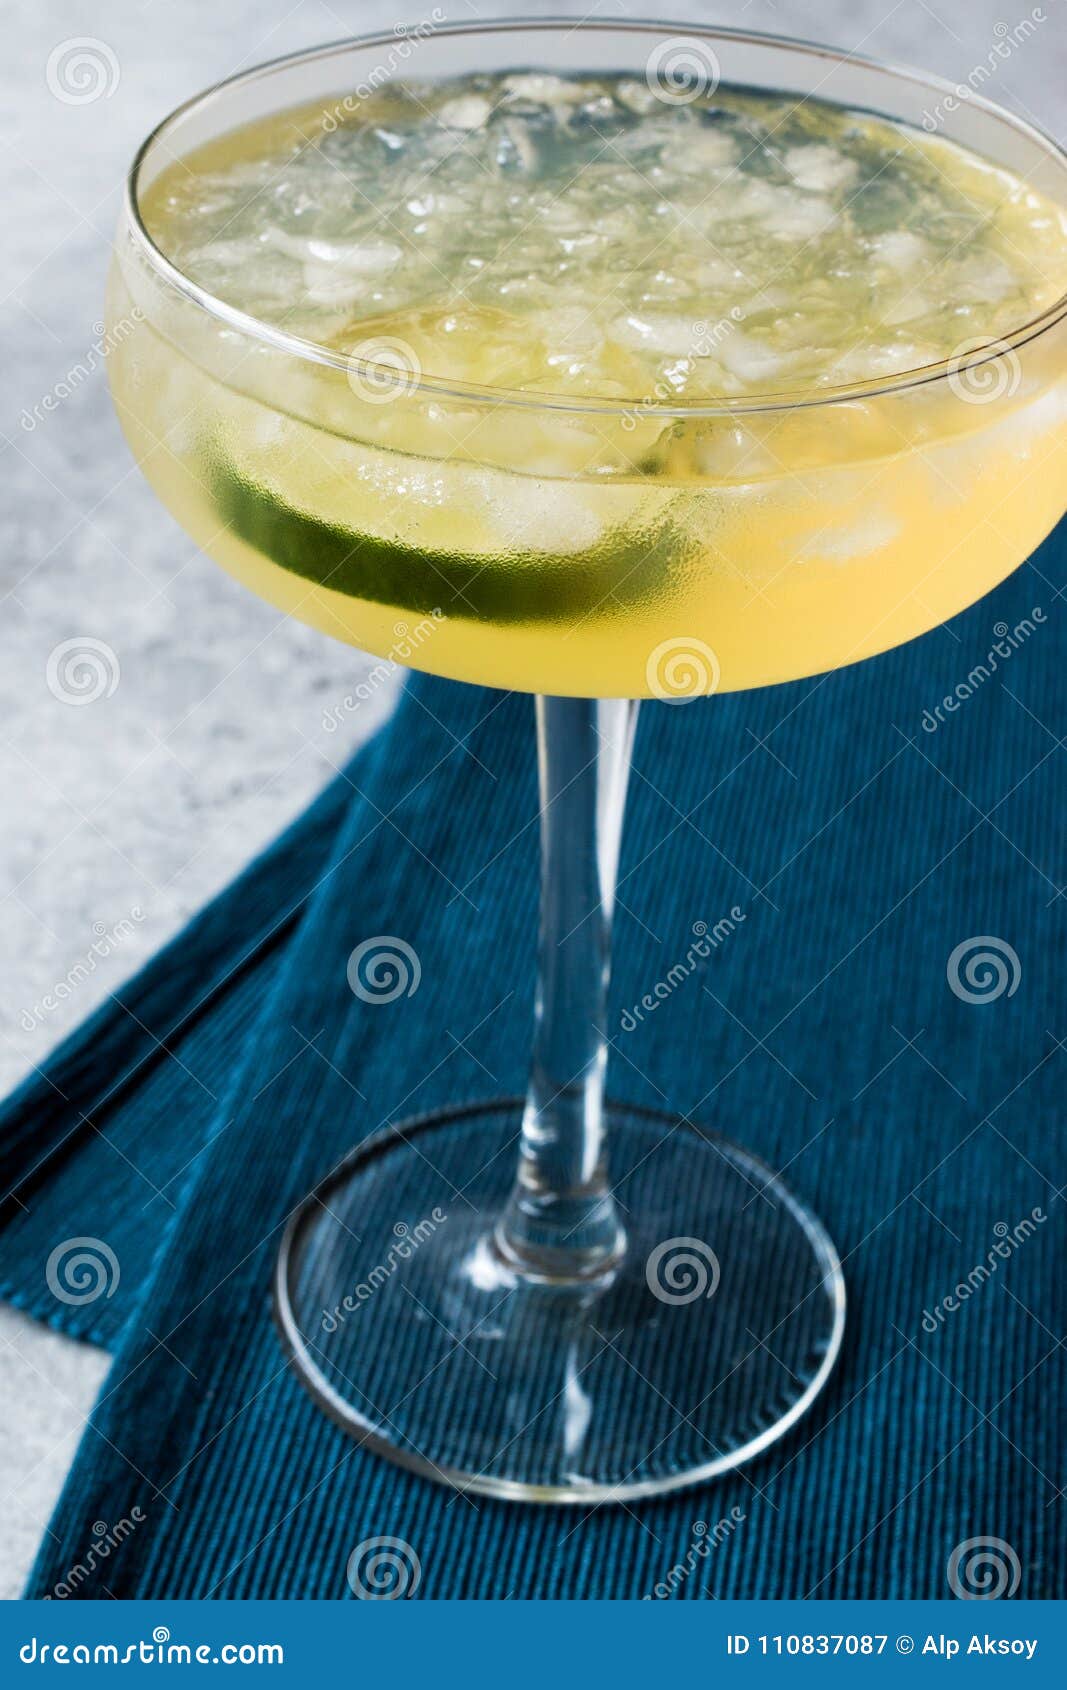 Gin Gimlet Cocktail with Lime and Crushed Ice. Stock Image - Image of ...